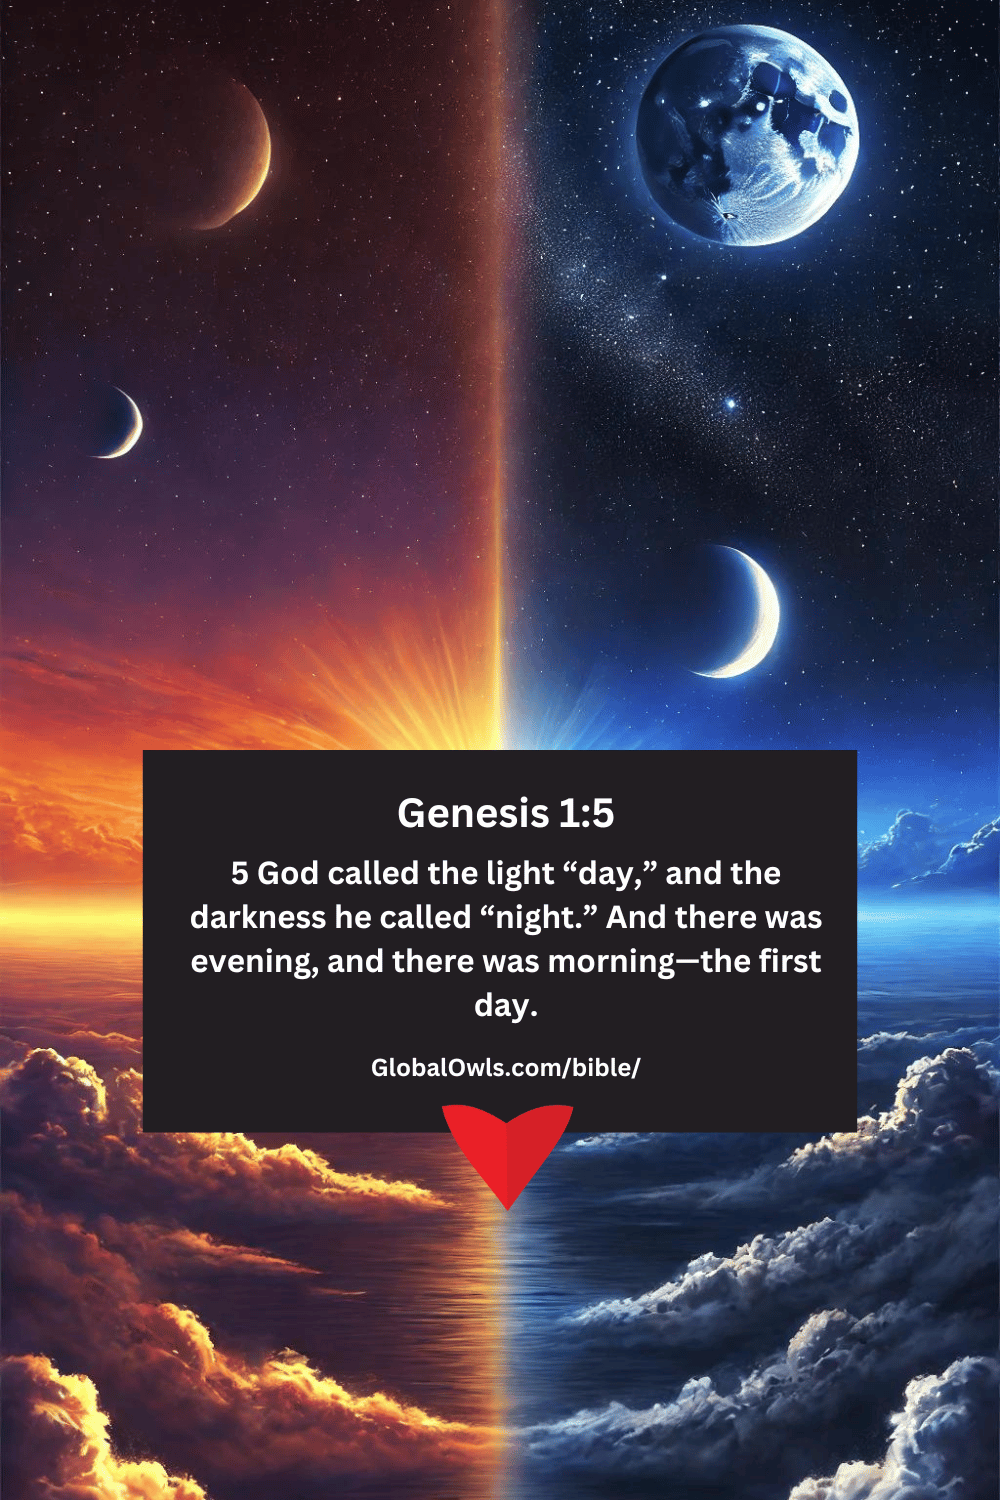 Genesis 1-5 God called the light “day,” and the darkness he called “night.” And there was evening, and there was morning—the first day.